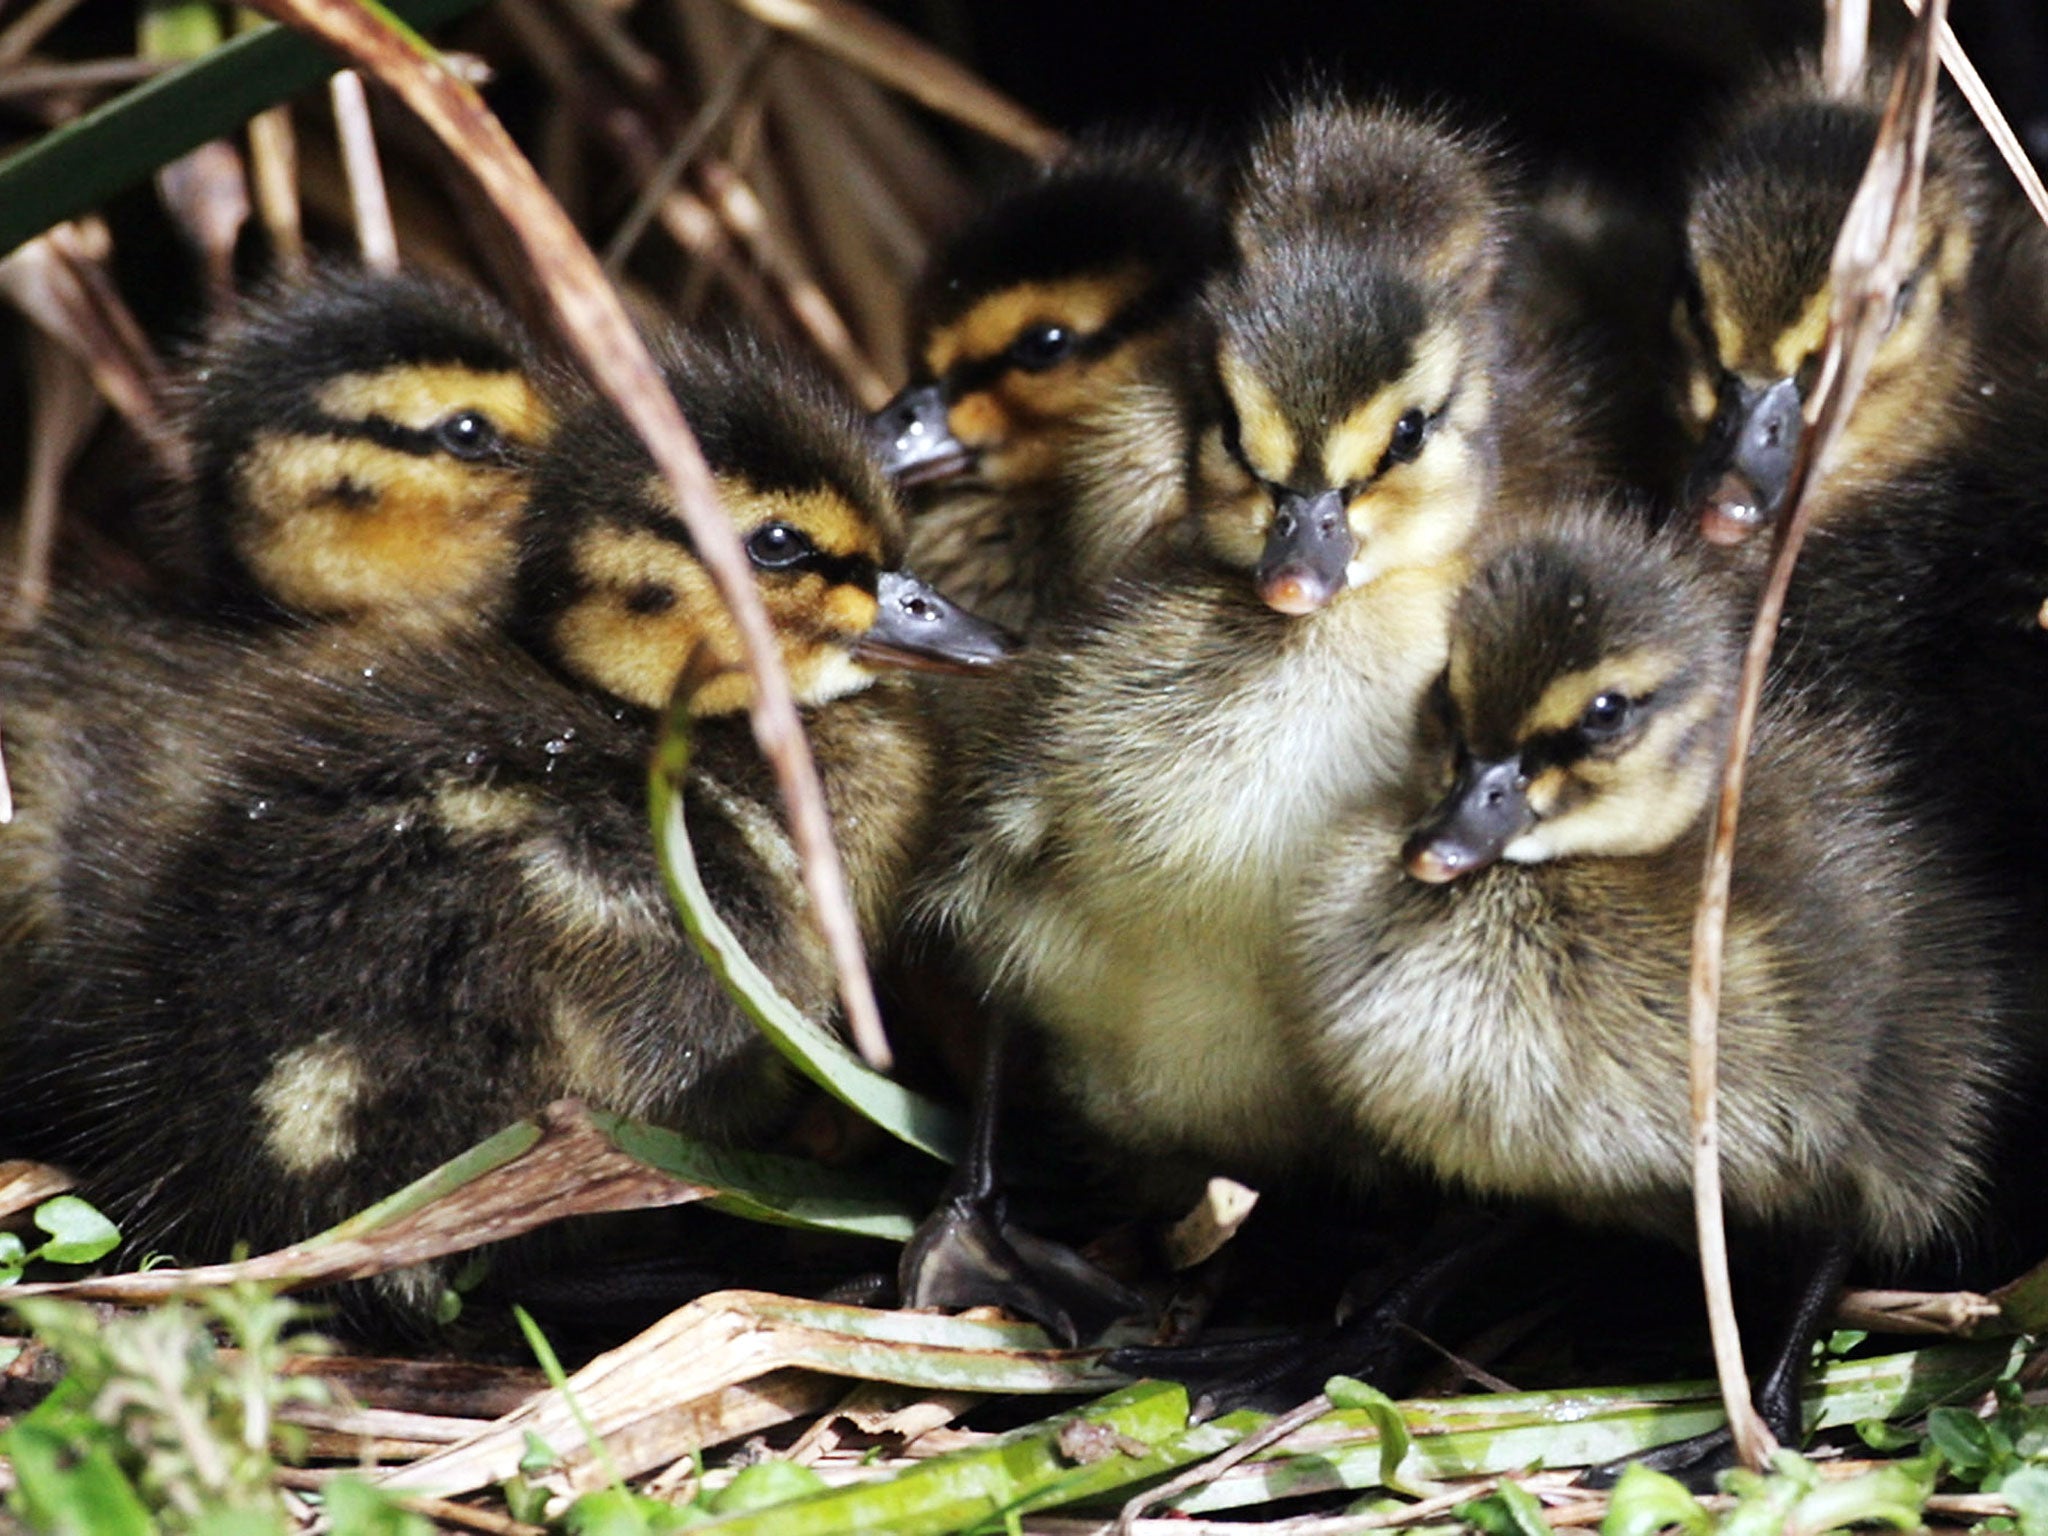 Recently hatched ducklings, unrelated to the video, shelter in the undergrowth as they enjoy the spring weather and sunshine at the Slimbridge Wetlands Wildlfire Centre near Dursley, England.